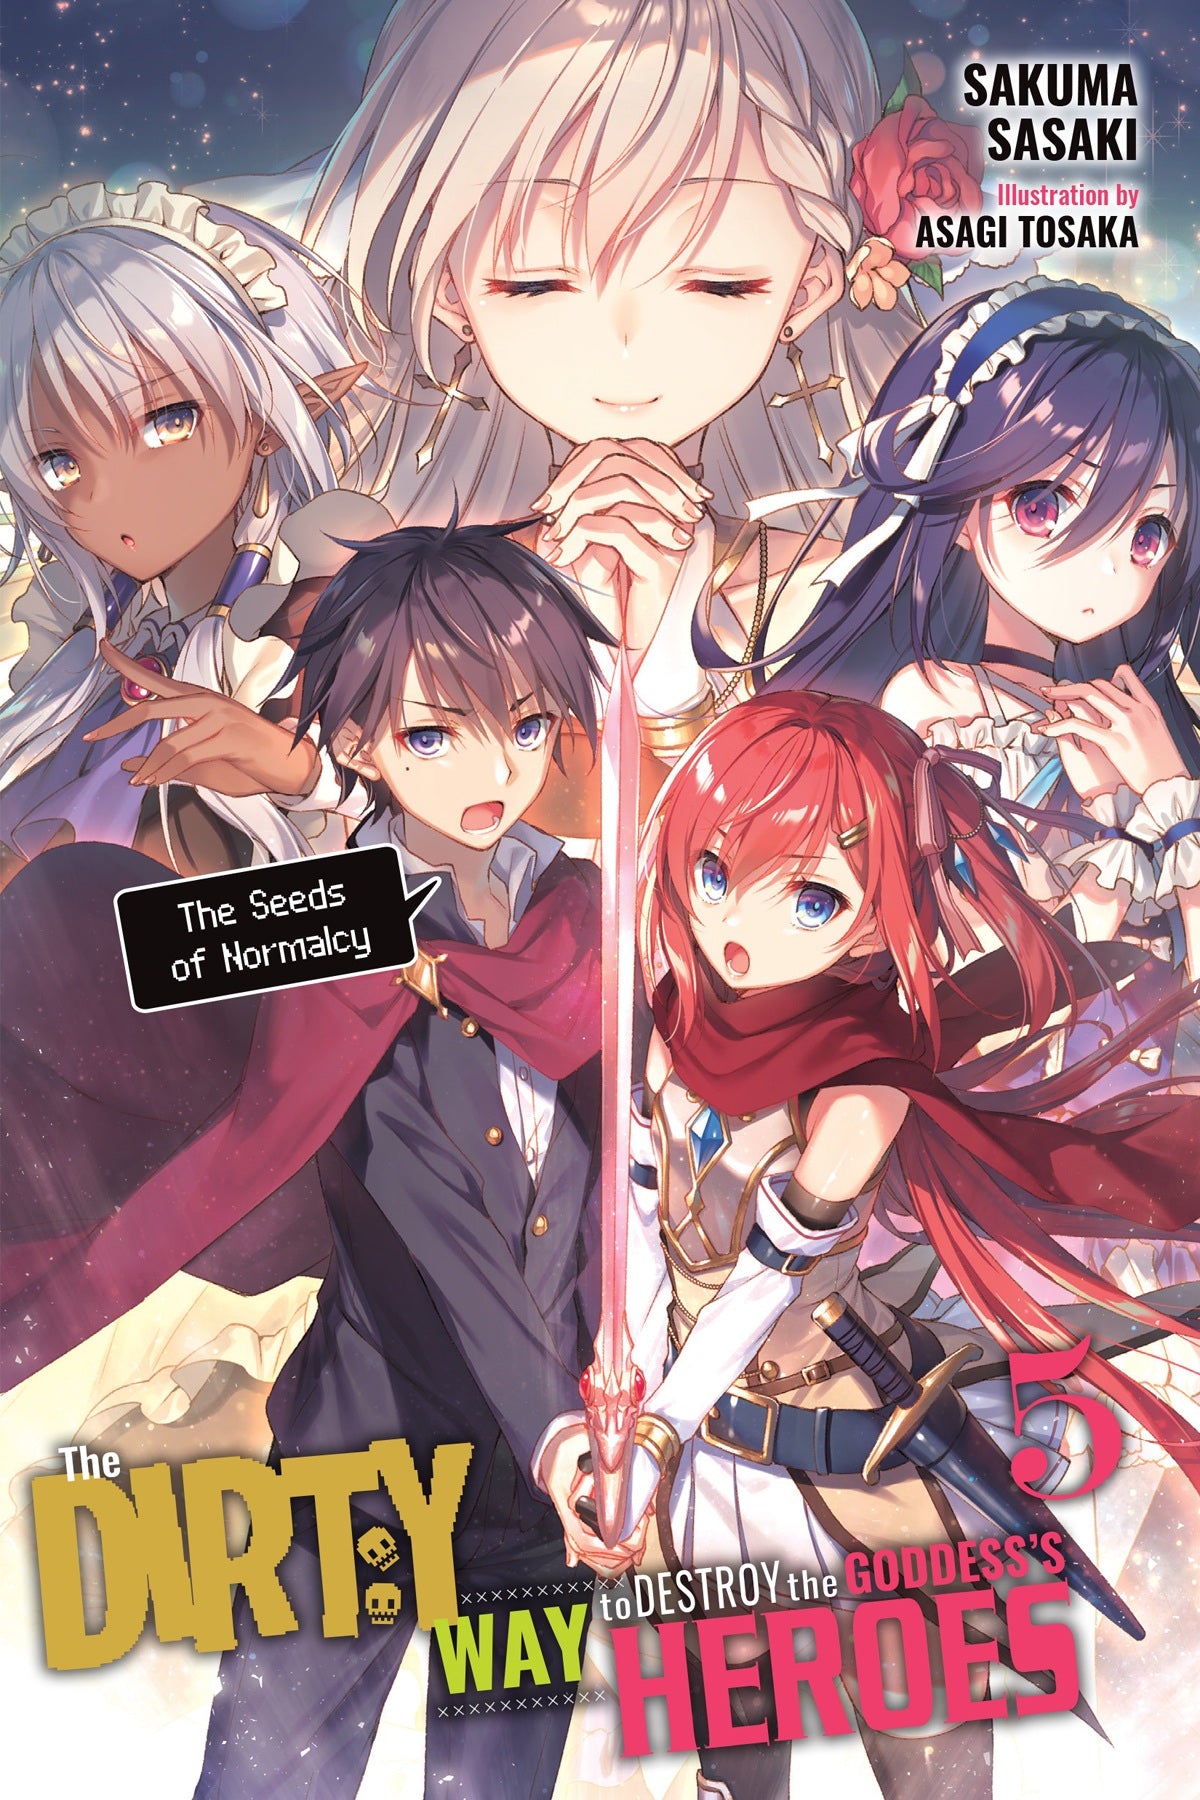 The Dirty Way to Destroy the Goddess's Heroes Vol. 05 (Light Novel): The Seeds of Normalcy